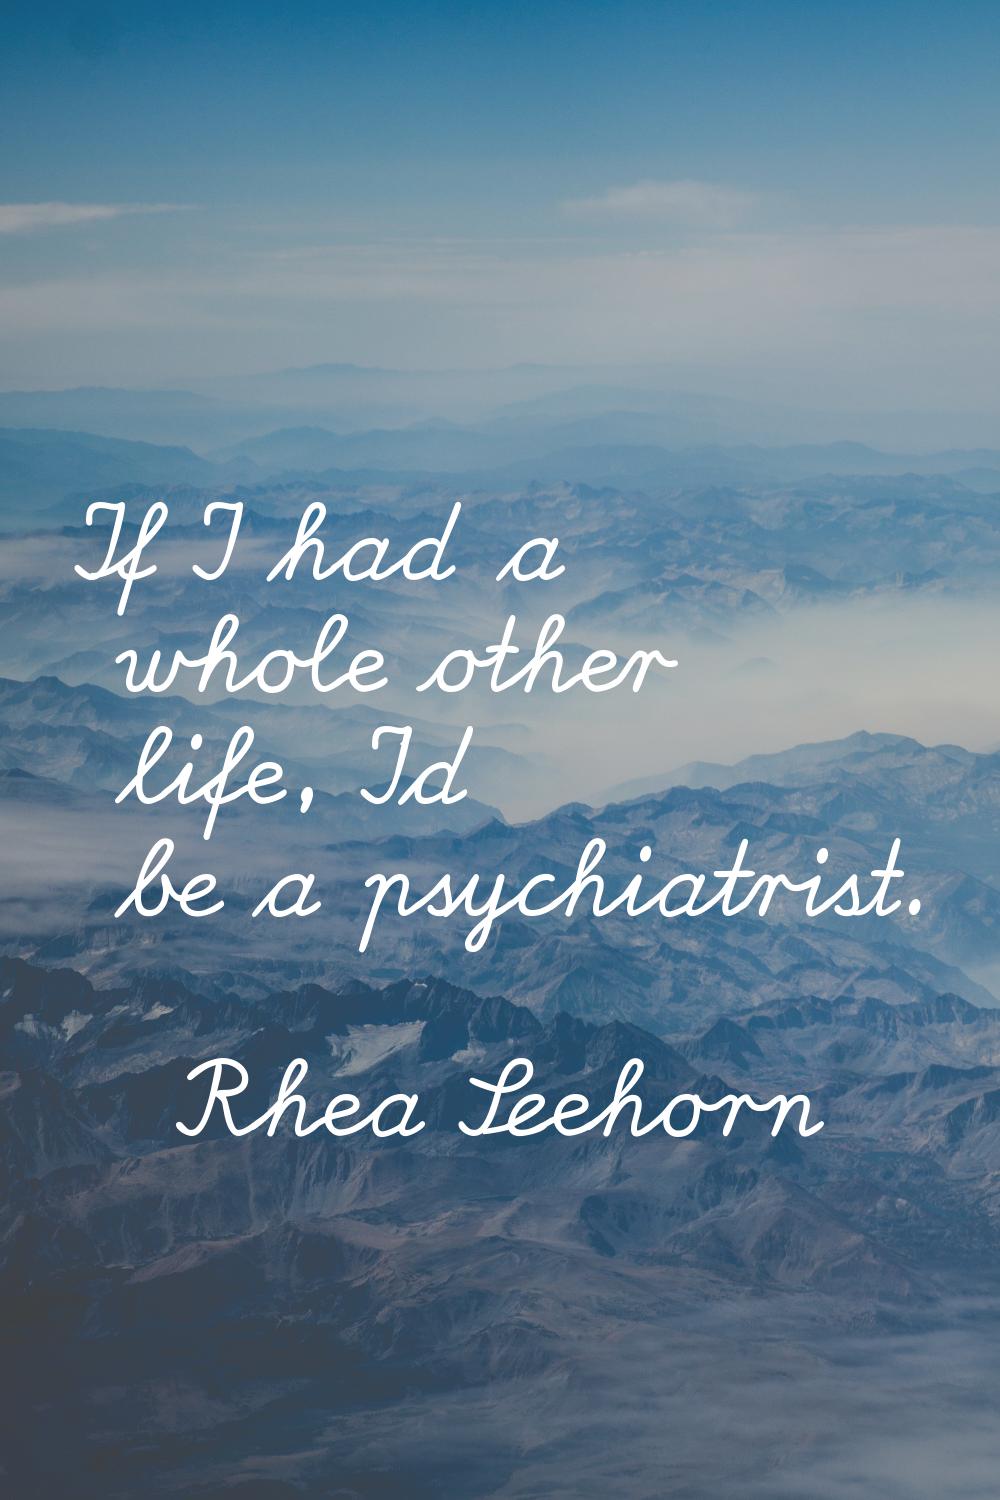 If I had a whole other life, I'd be a psychiatrist.